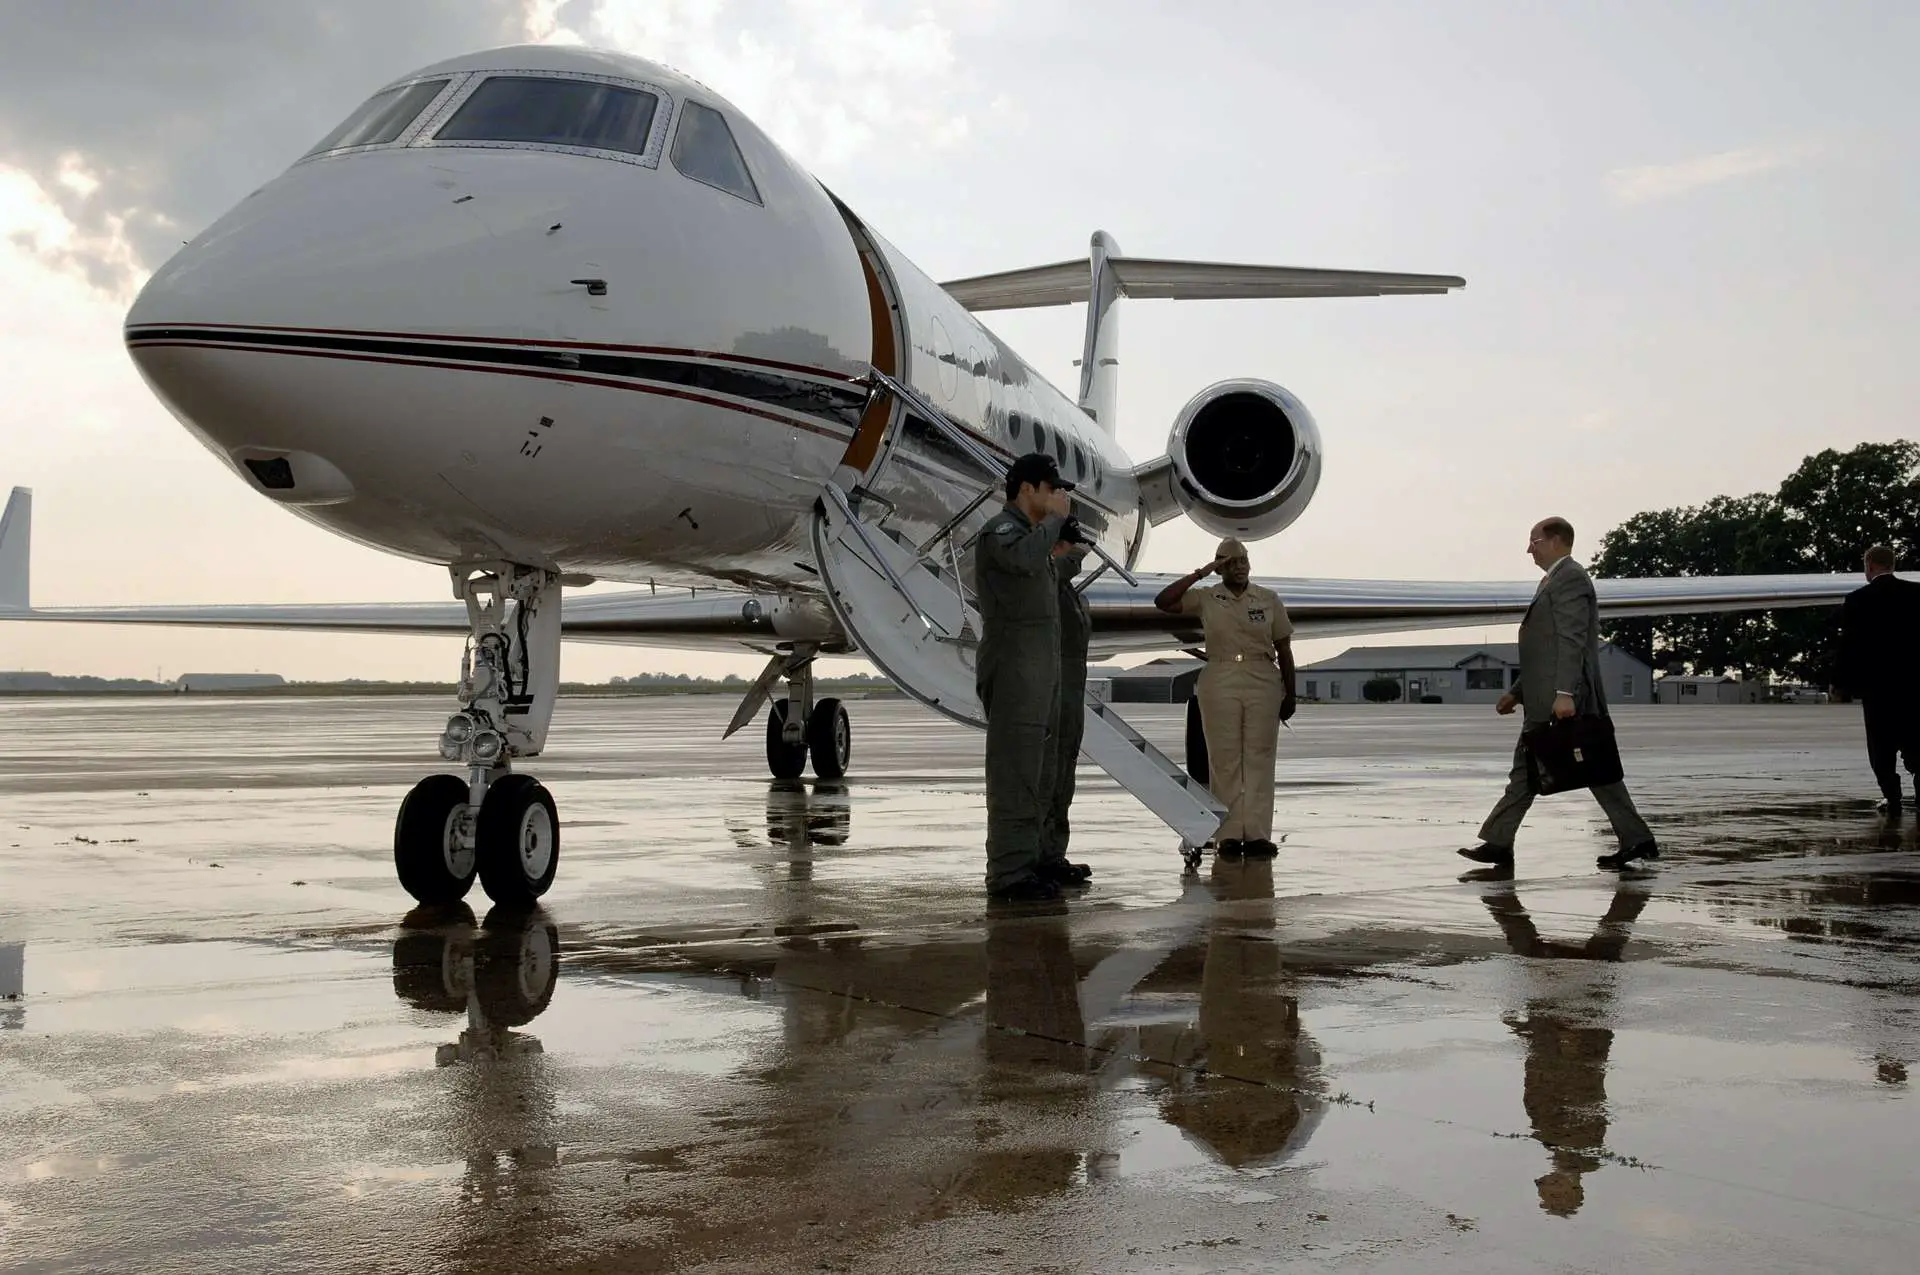 Business Aircraft | Air Travel | Private Jets - What I'D Like To Say If I Ever Set Foot On One! | Air Travel | Author: Anthony Bianco - The Travel Tart Blog